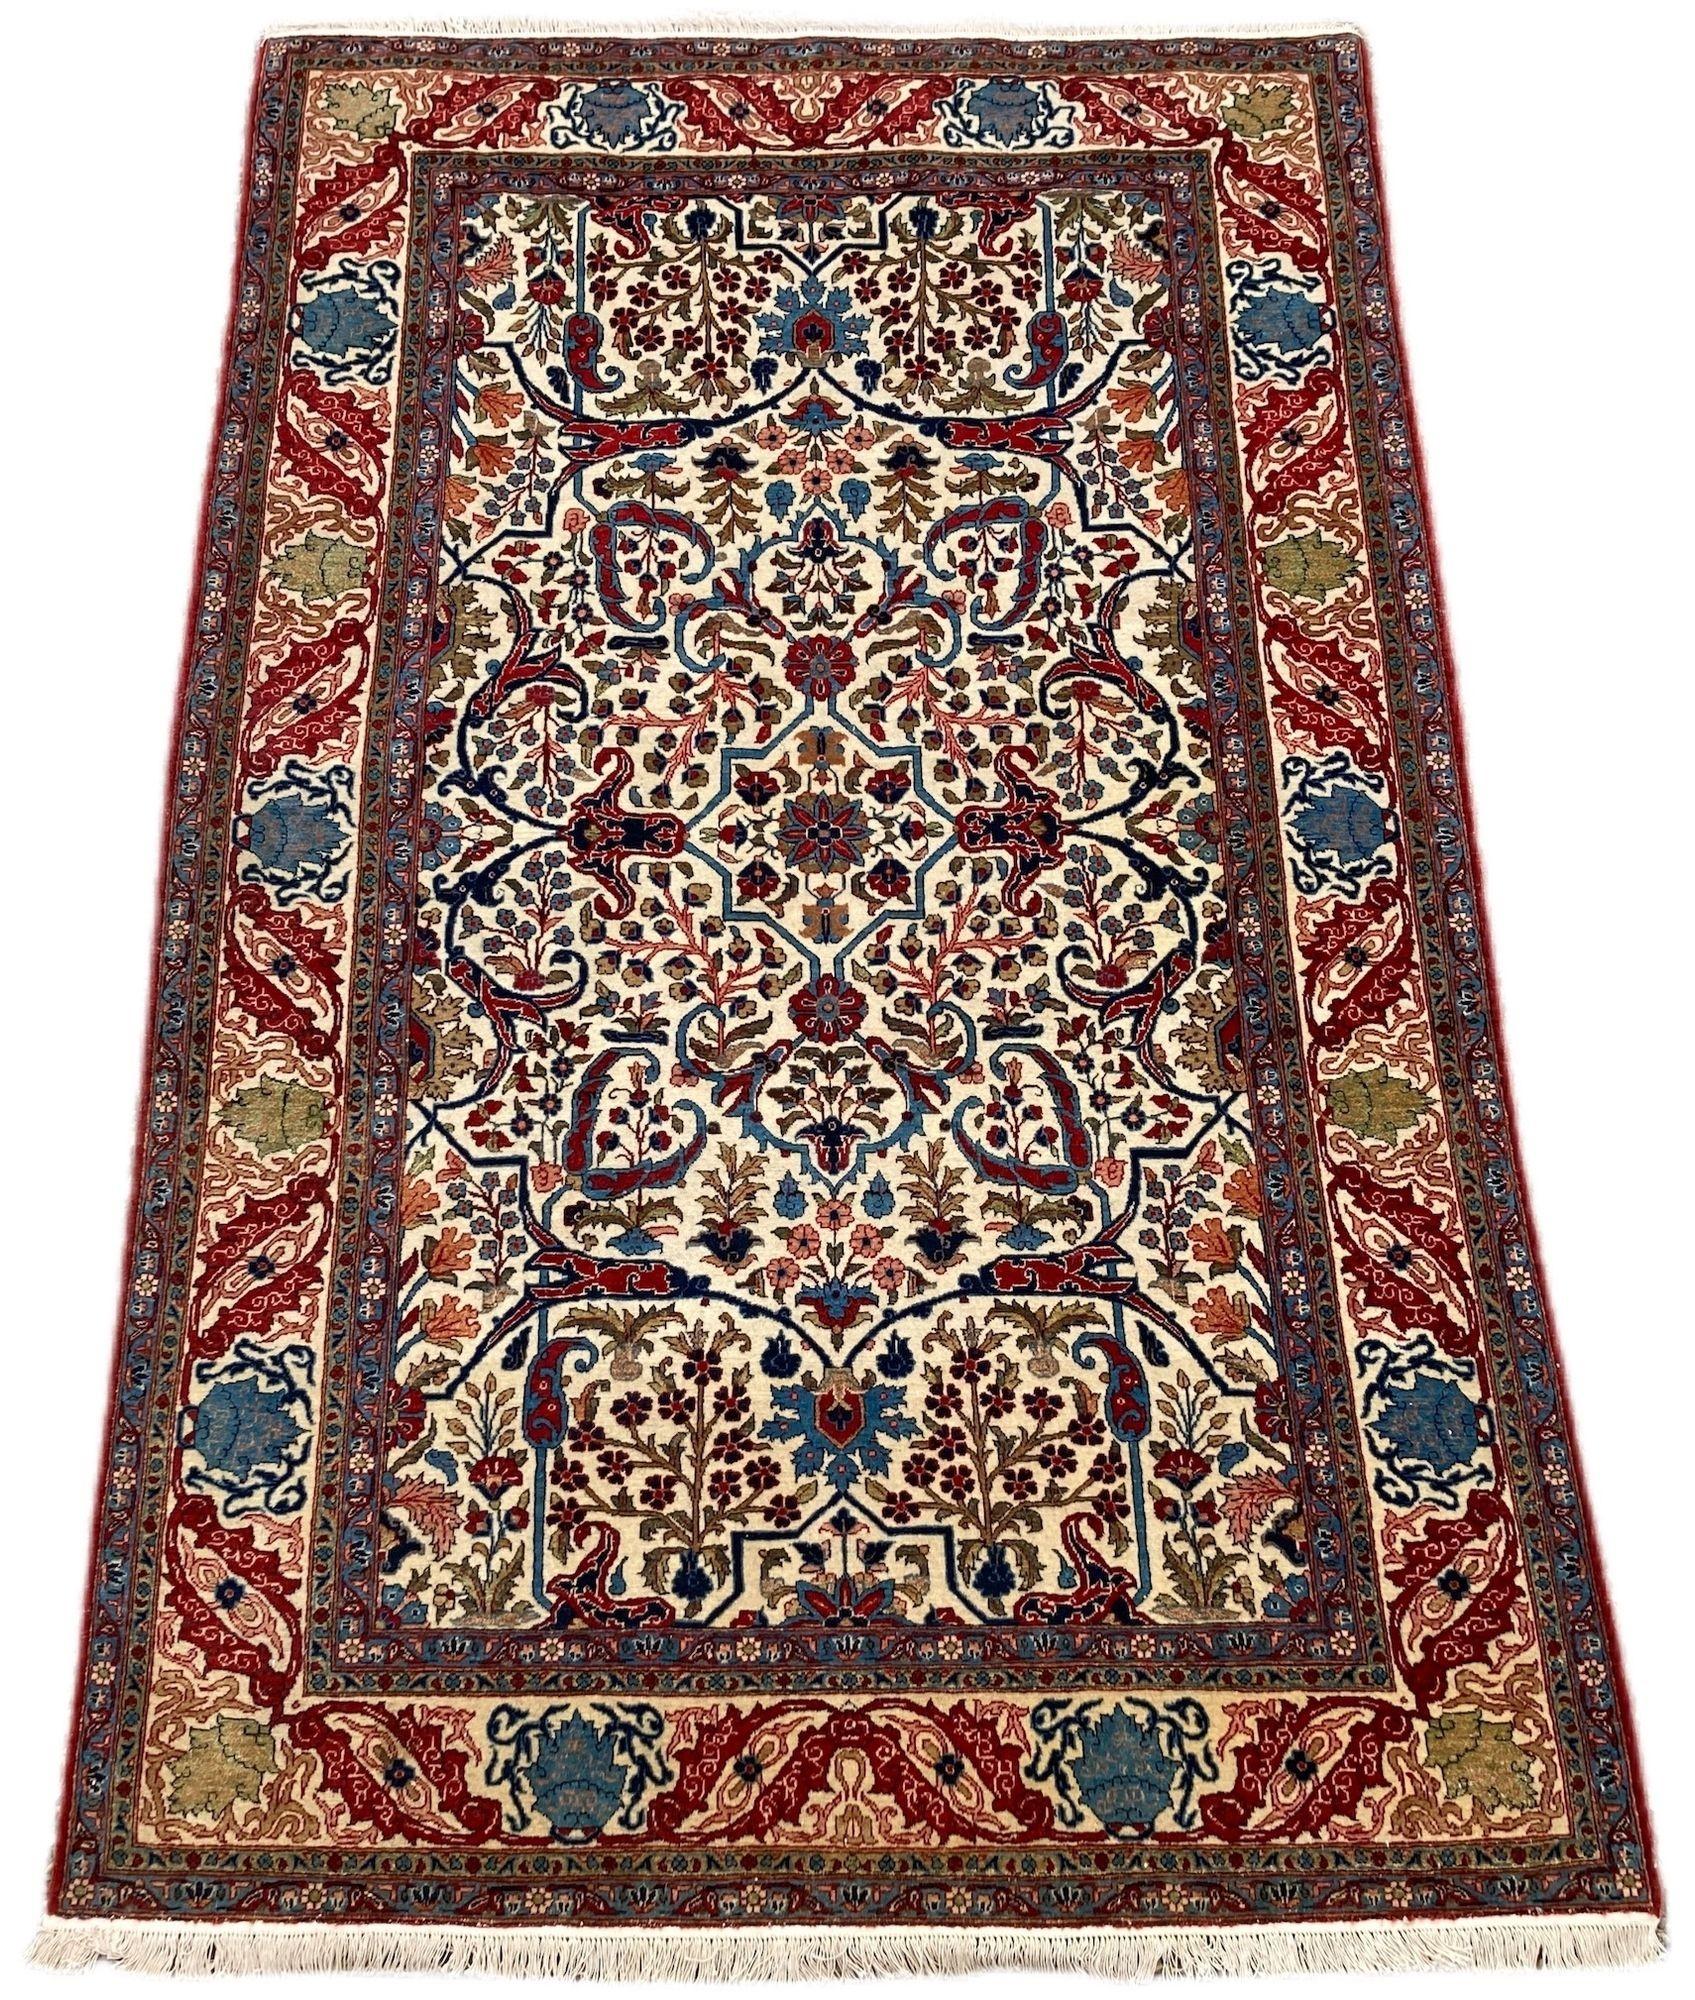 A highly decorative antique Qum rug, hand woven circa 1910 with an elegant, all over Garrous design on an ivory field. Finely woven with lovely wool quality and great secondary colours of terracotta, greens and blues.
Size: 2.10m x 1.36m (6ft 11in x